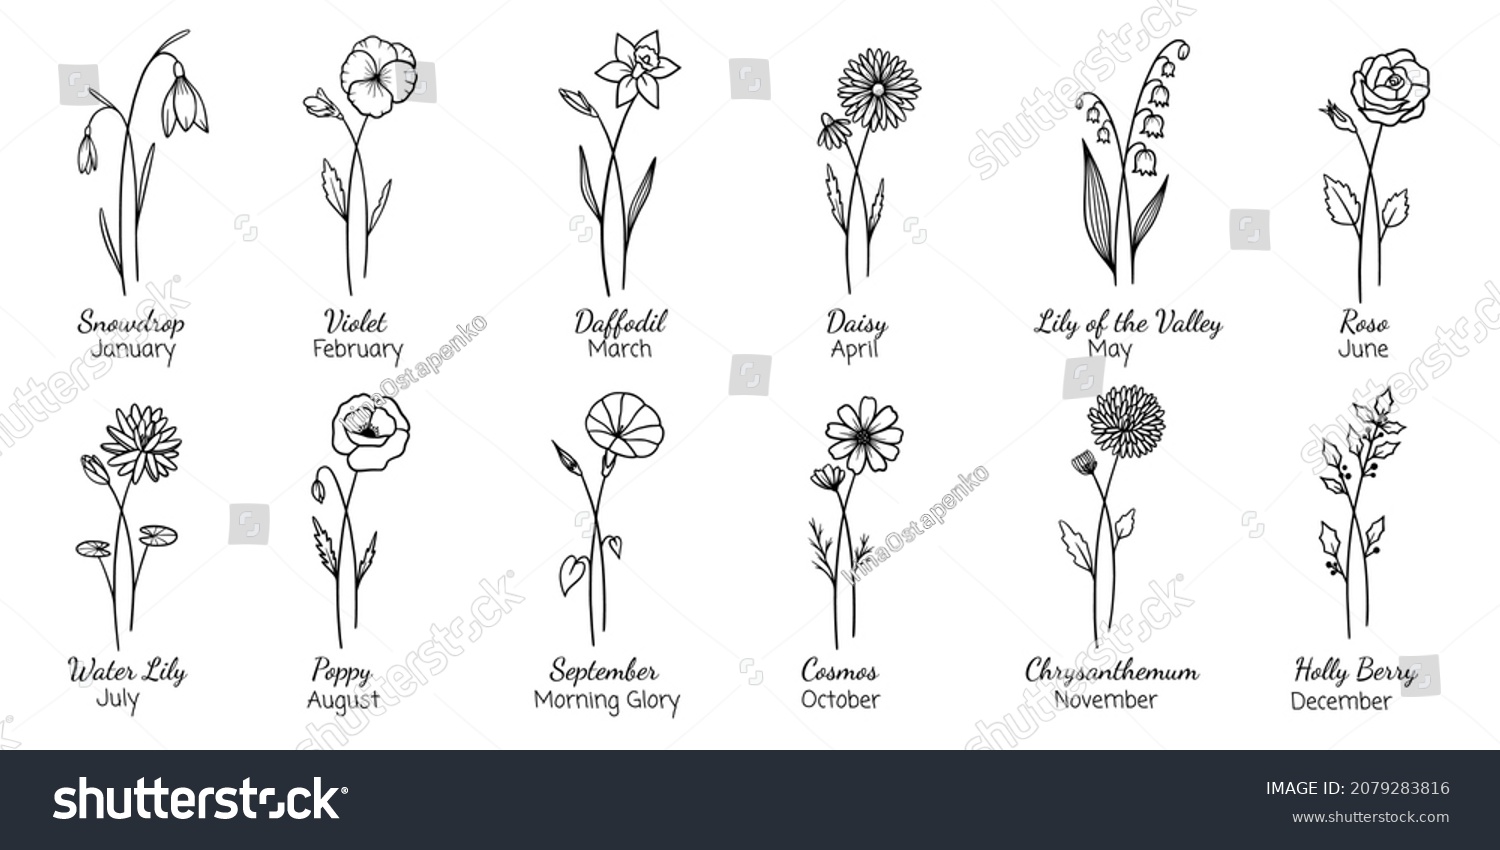 birth month flower drawings - fashiondesignsketchespencil